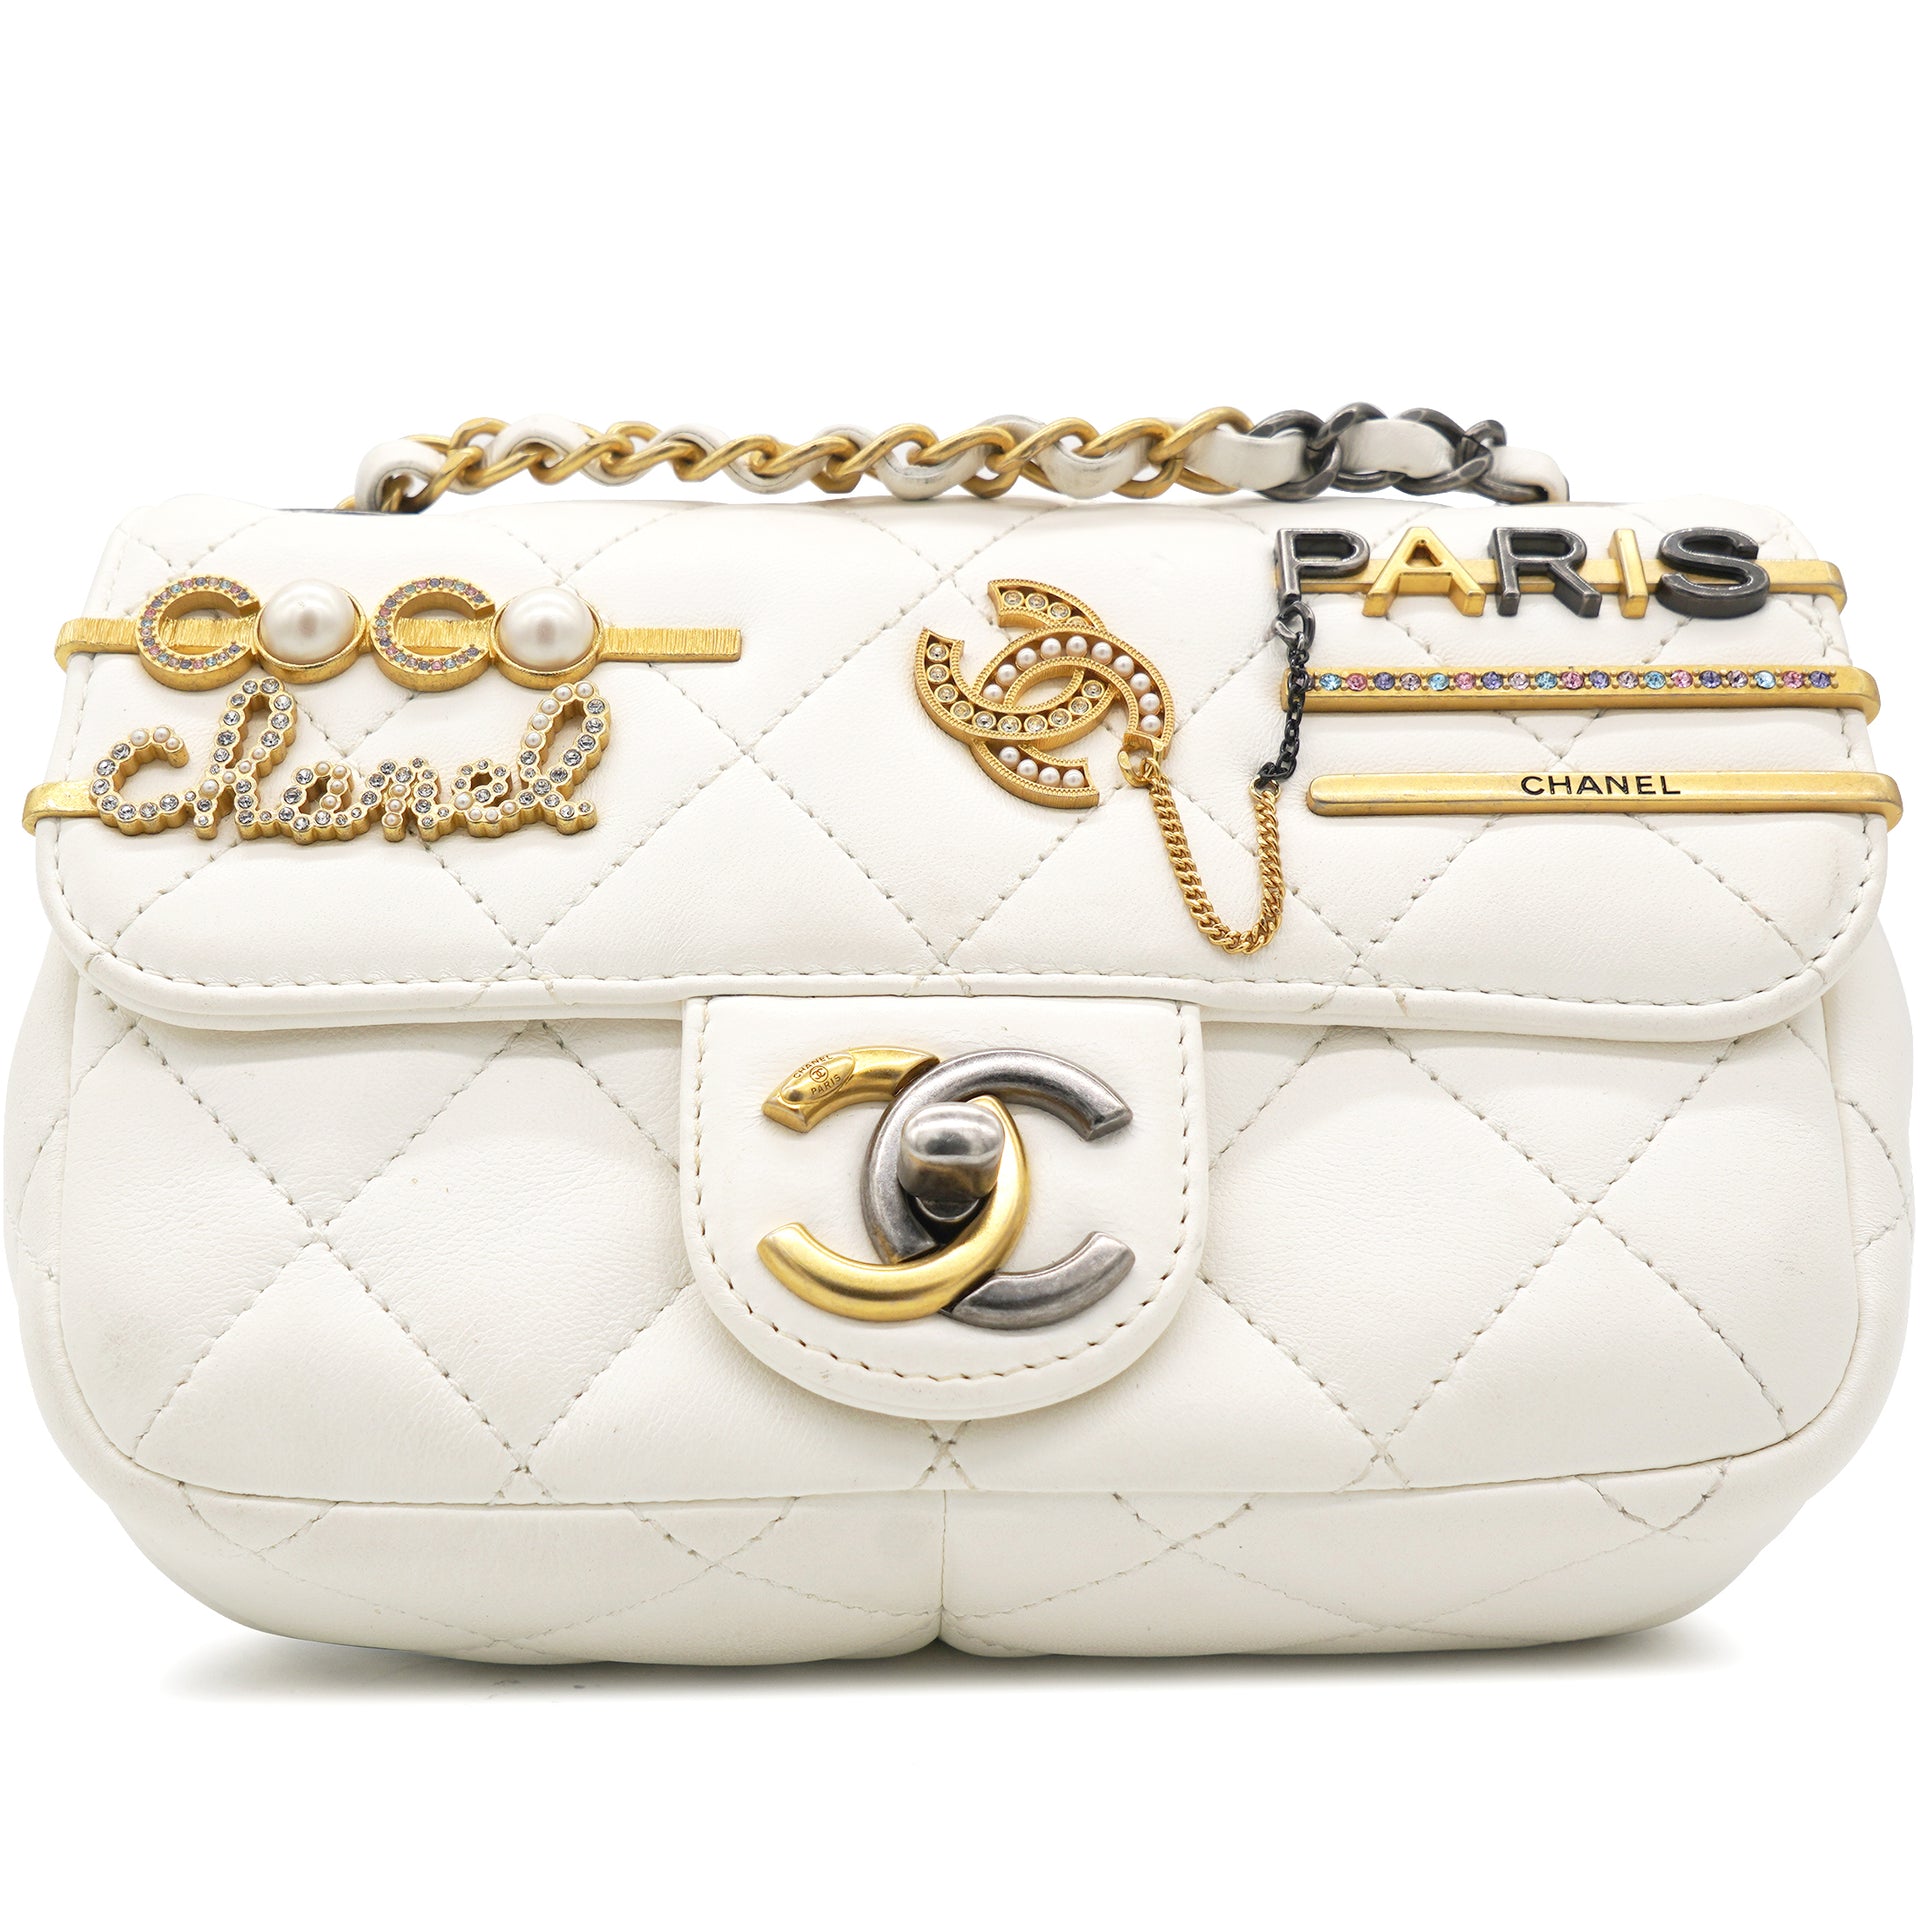 Chanel Top Handle Mini Rectangular Flap Bag with Charm White Lambskin – Coco  Approved Studio